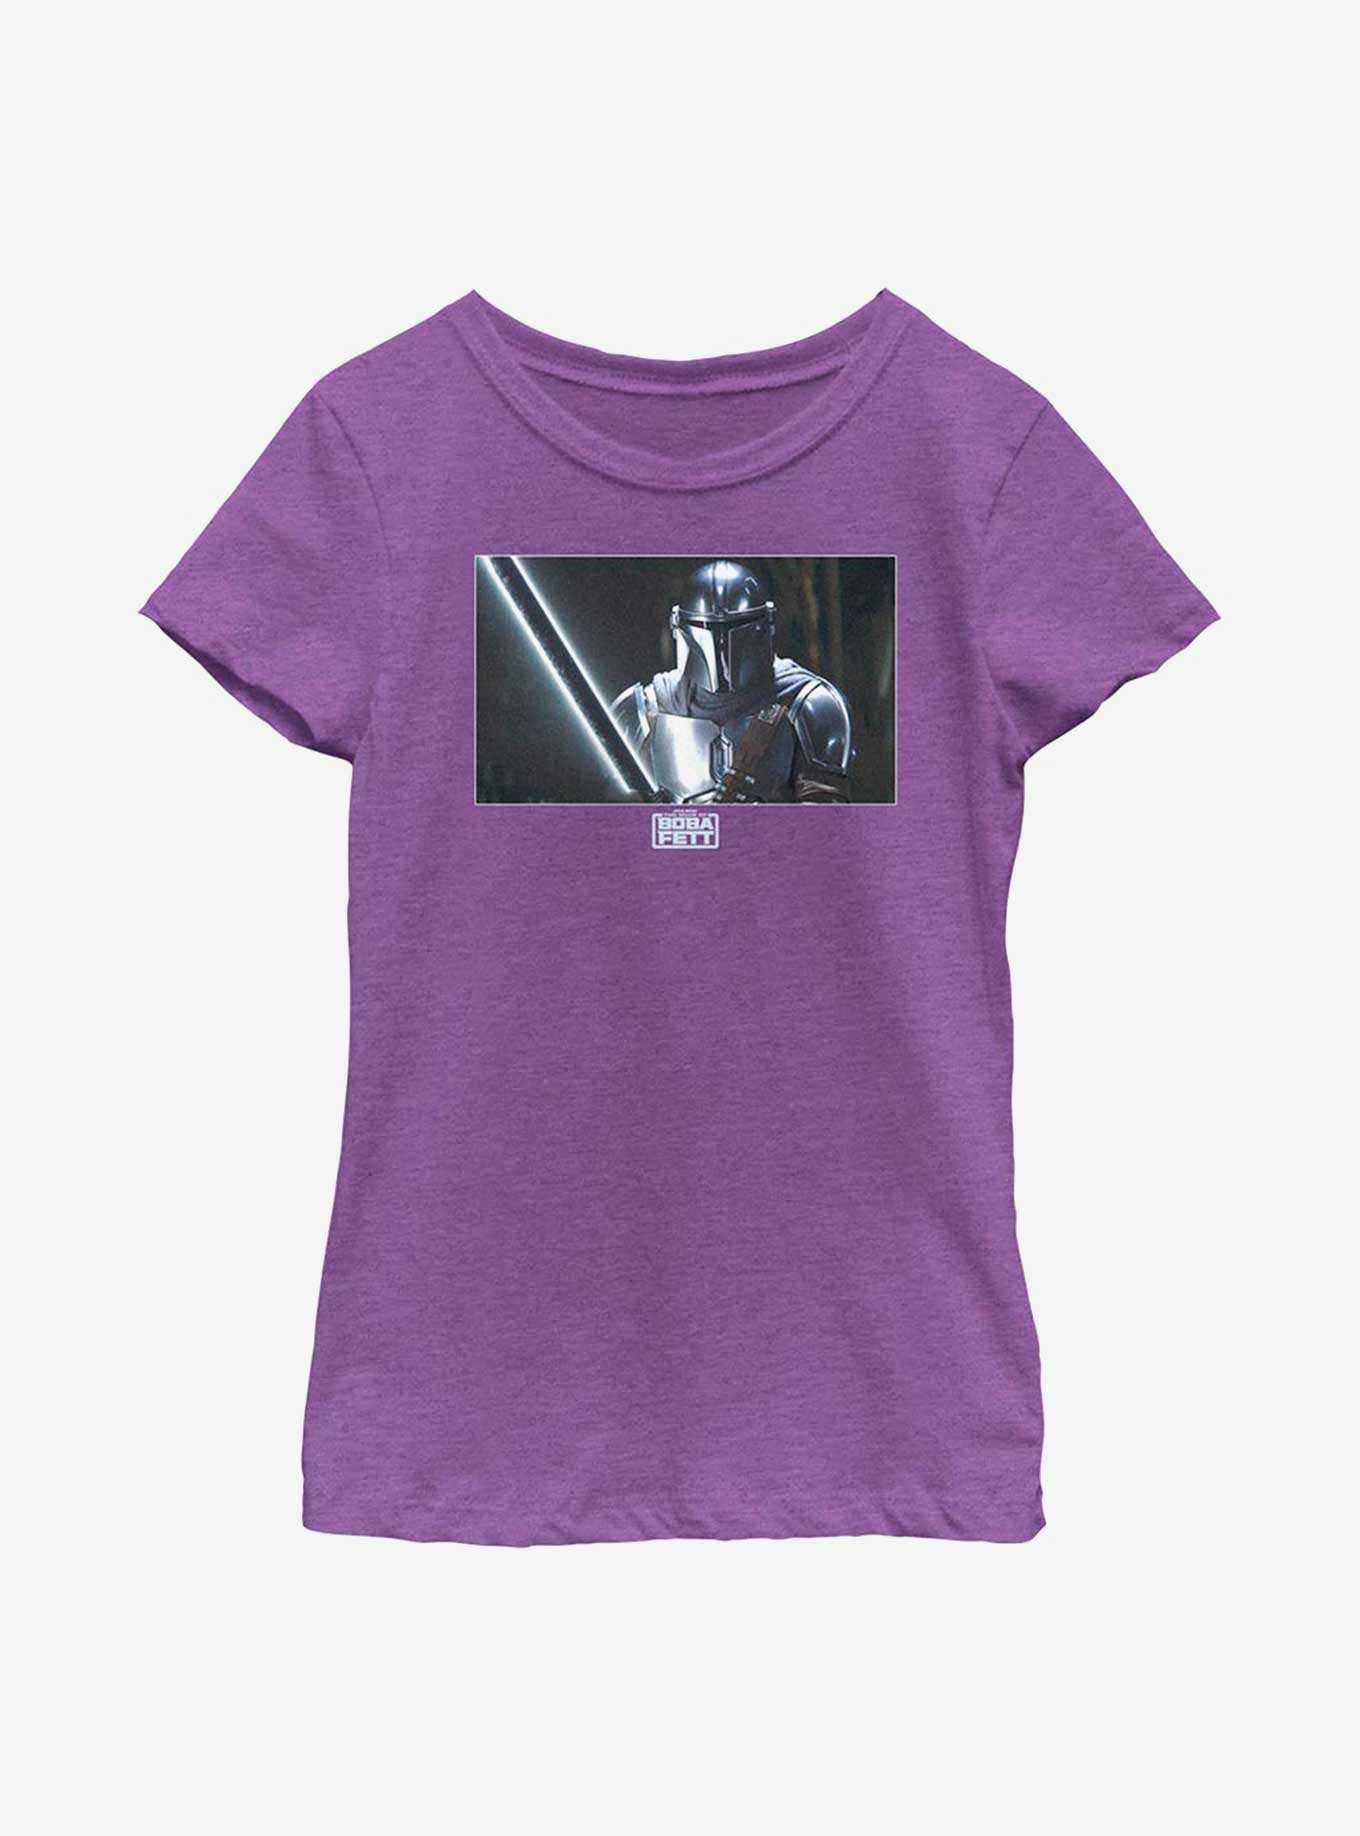 Star Wars The Book Of Boba Fett Warm Or Cold Youth Girls T-Shirt, , hi-res